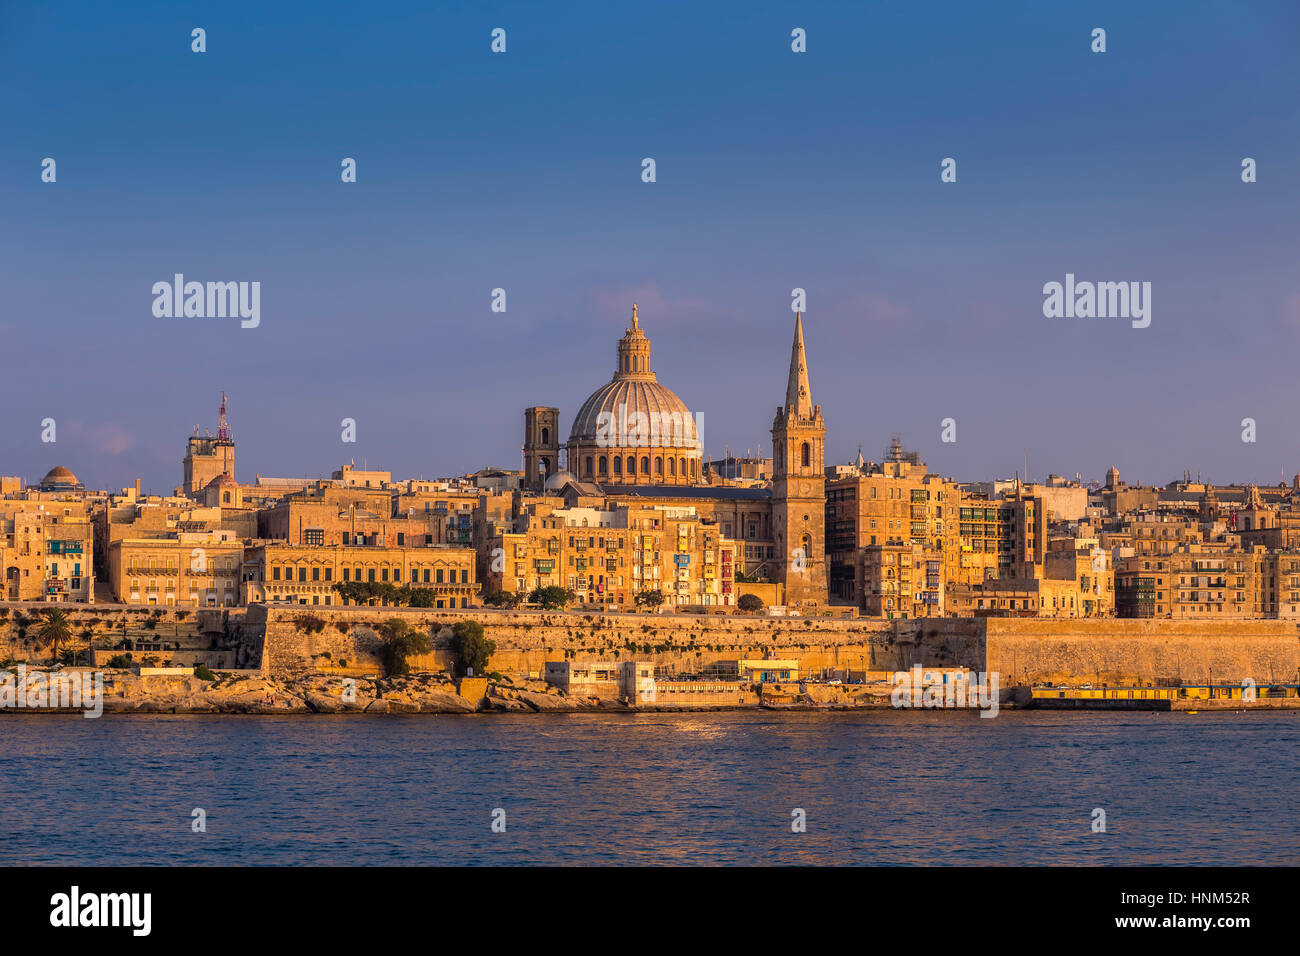 Valletta, Malta - The famous St.Paul's Cathedral and the ancient city of Valletta at sunset with clear blue sky Stock Photo